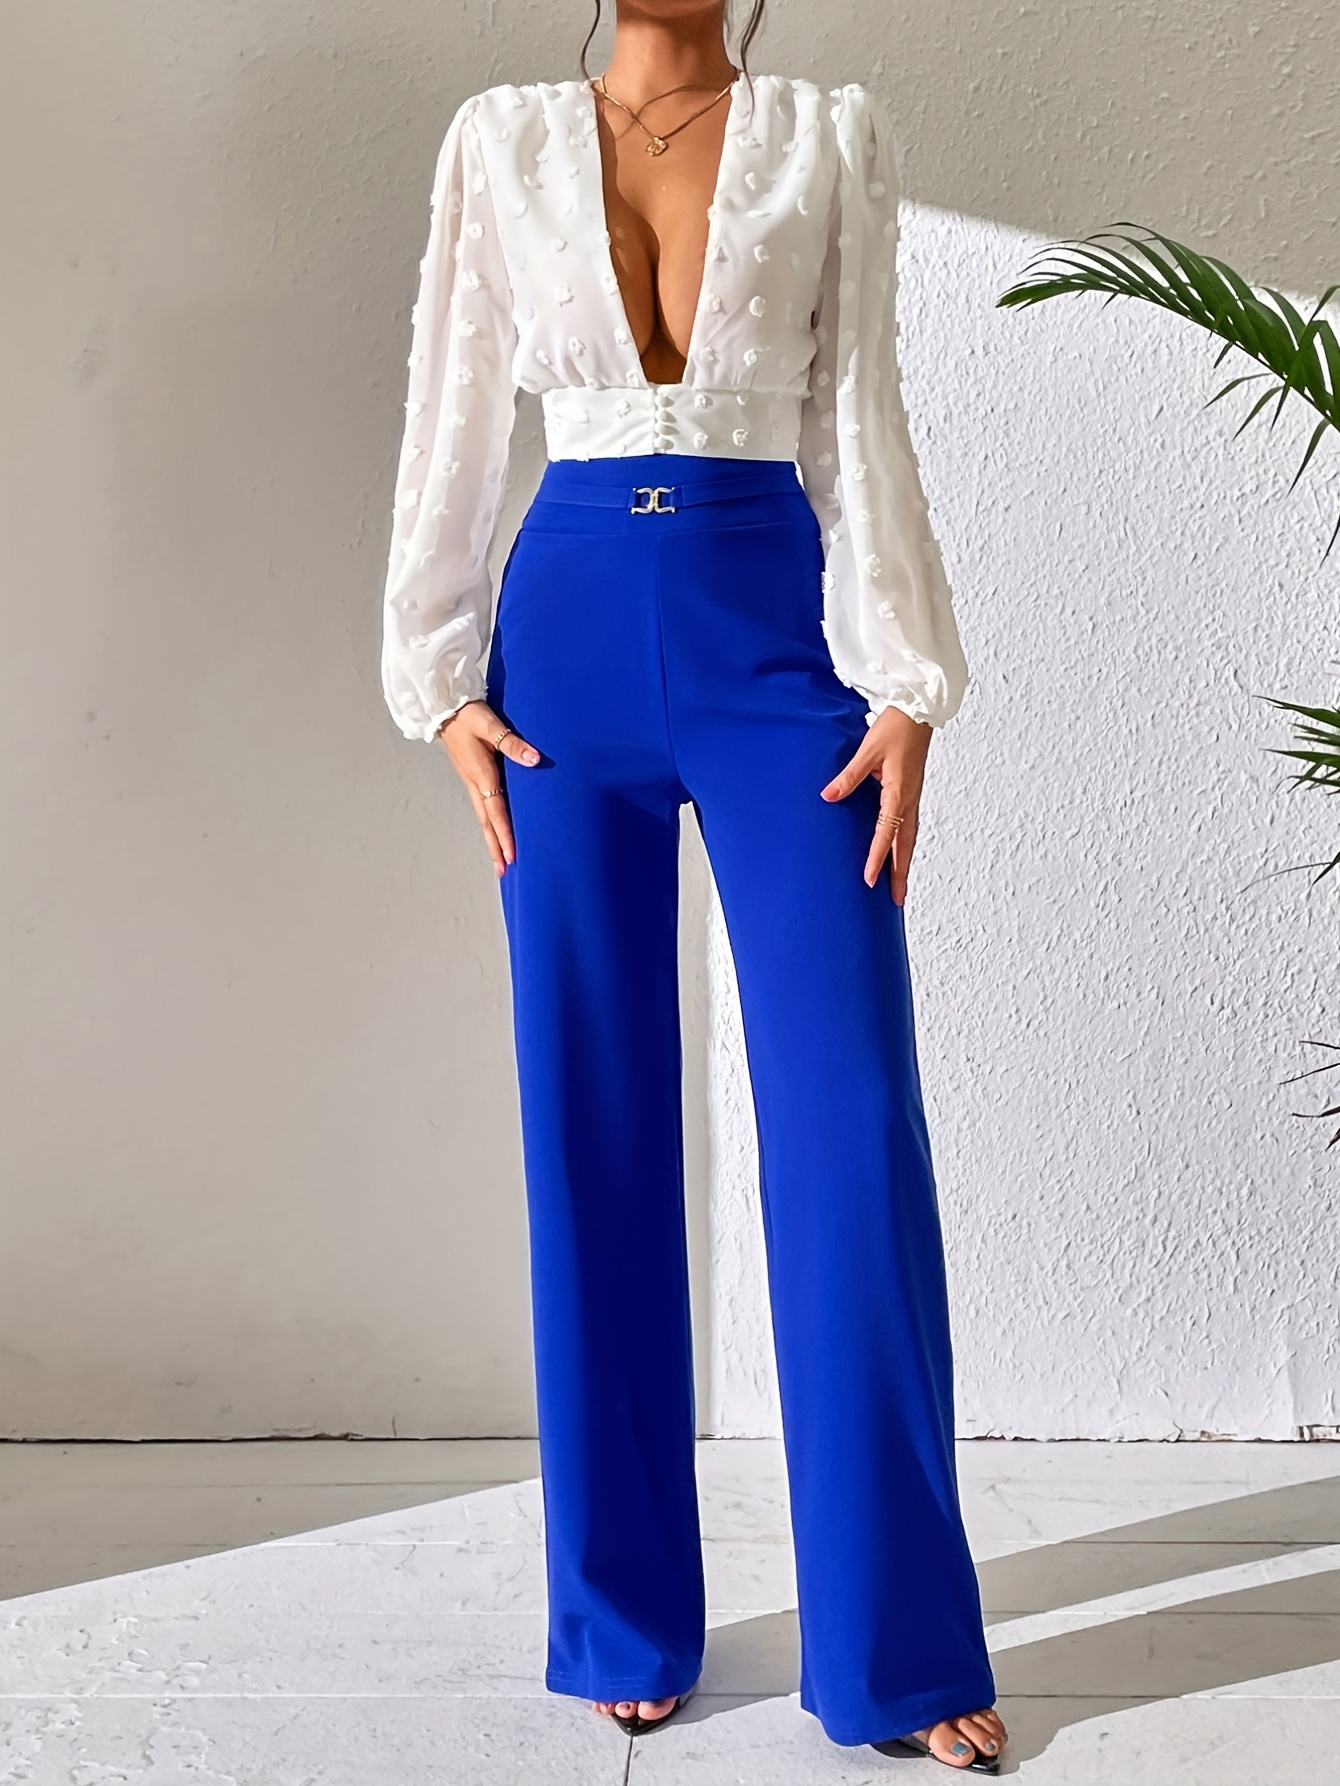 Dress Pants for Women High Waisted Zipper Wide Leg Pants Casual Baggy Comfy  Work Office Lounge Trousers with Pockets Ladies Clothes 